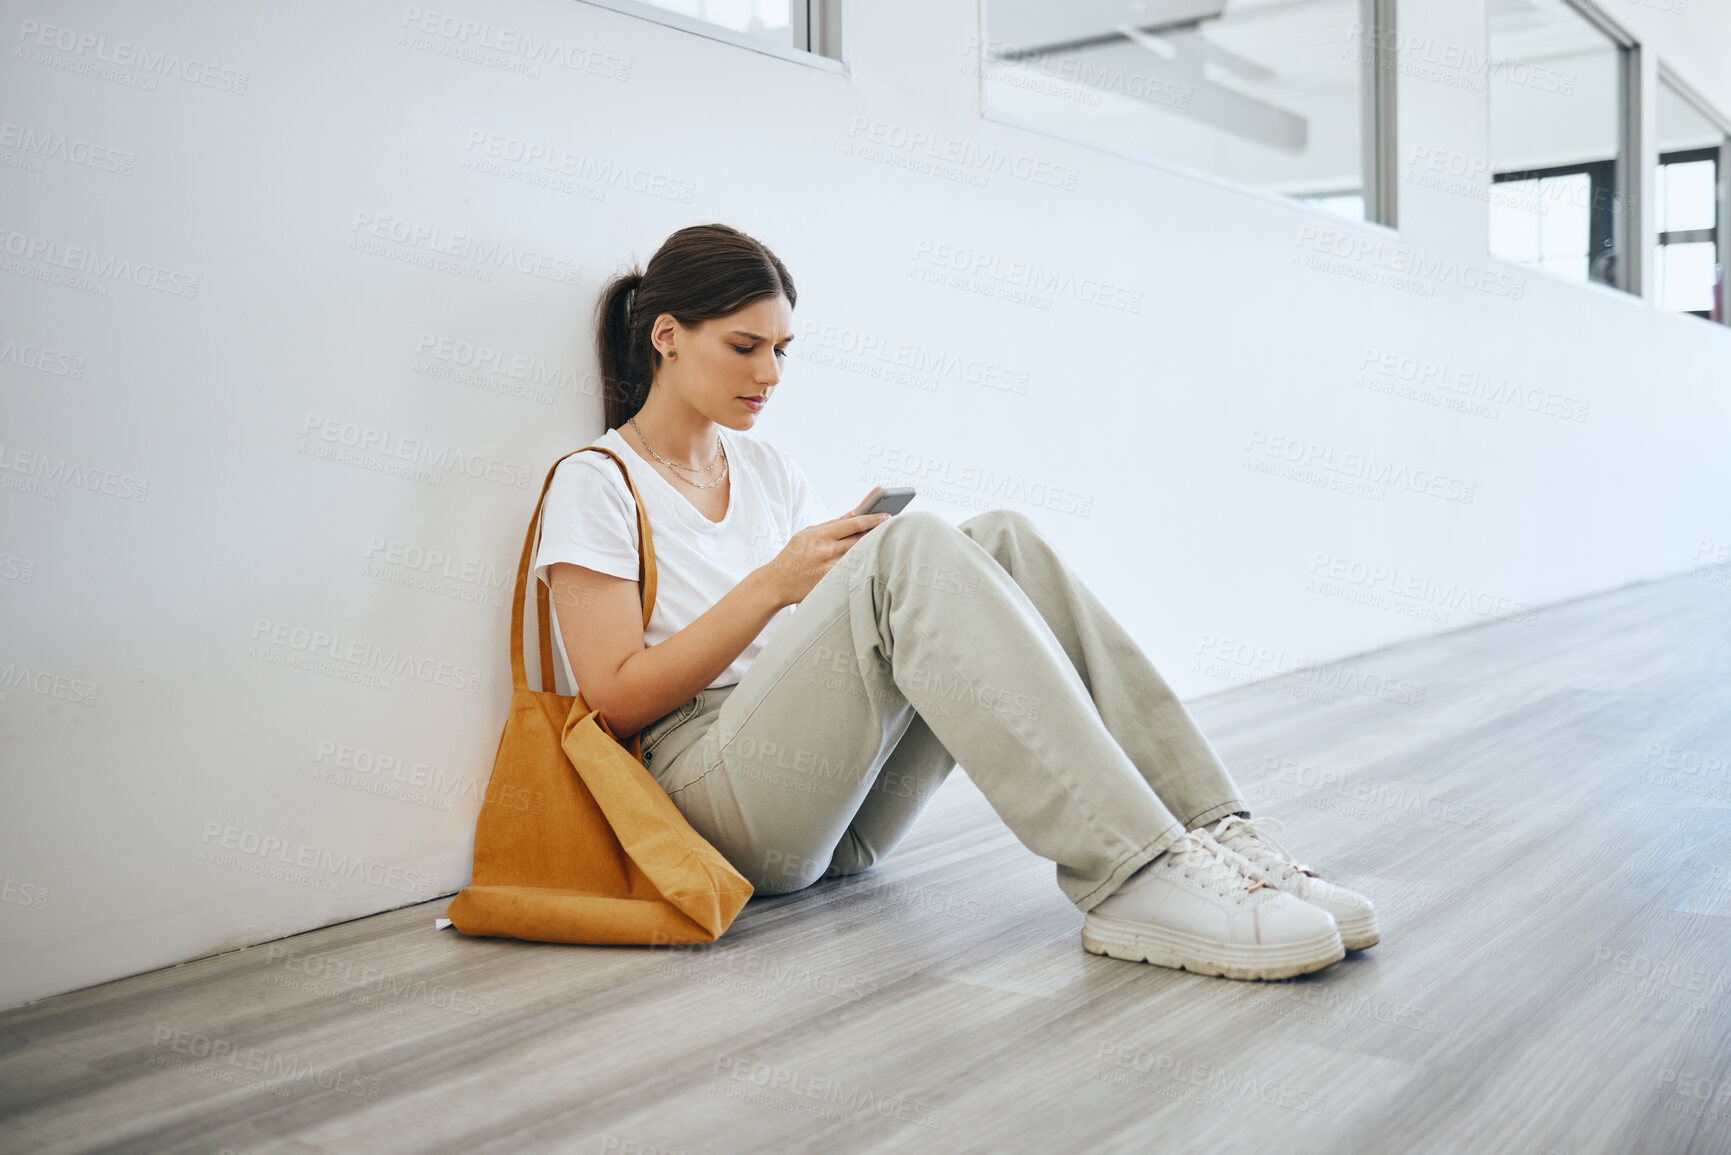 Buy stock photo Sad university woman, student alone on the floor in the hallway after class or lecture and browsing social media on smartphone. Academic depression, stress and anxiety from college education pressure